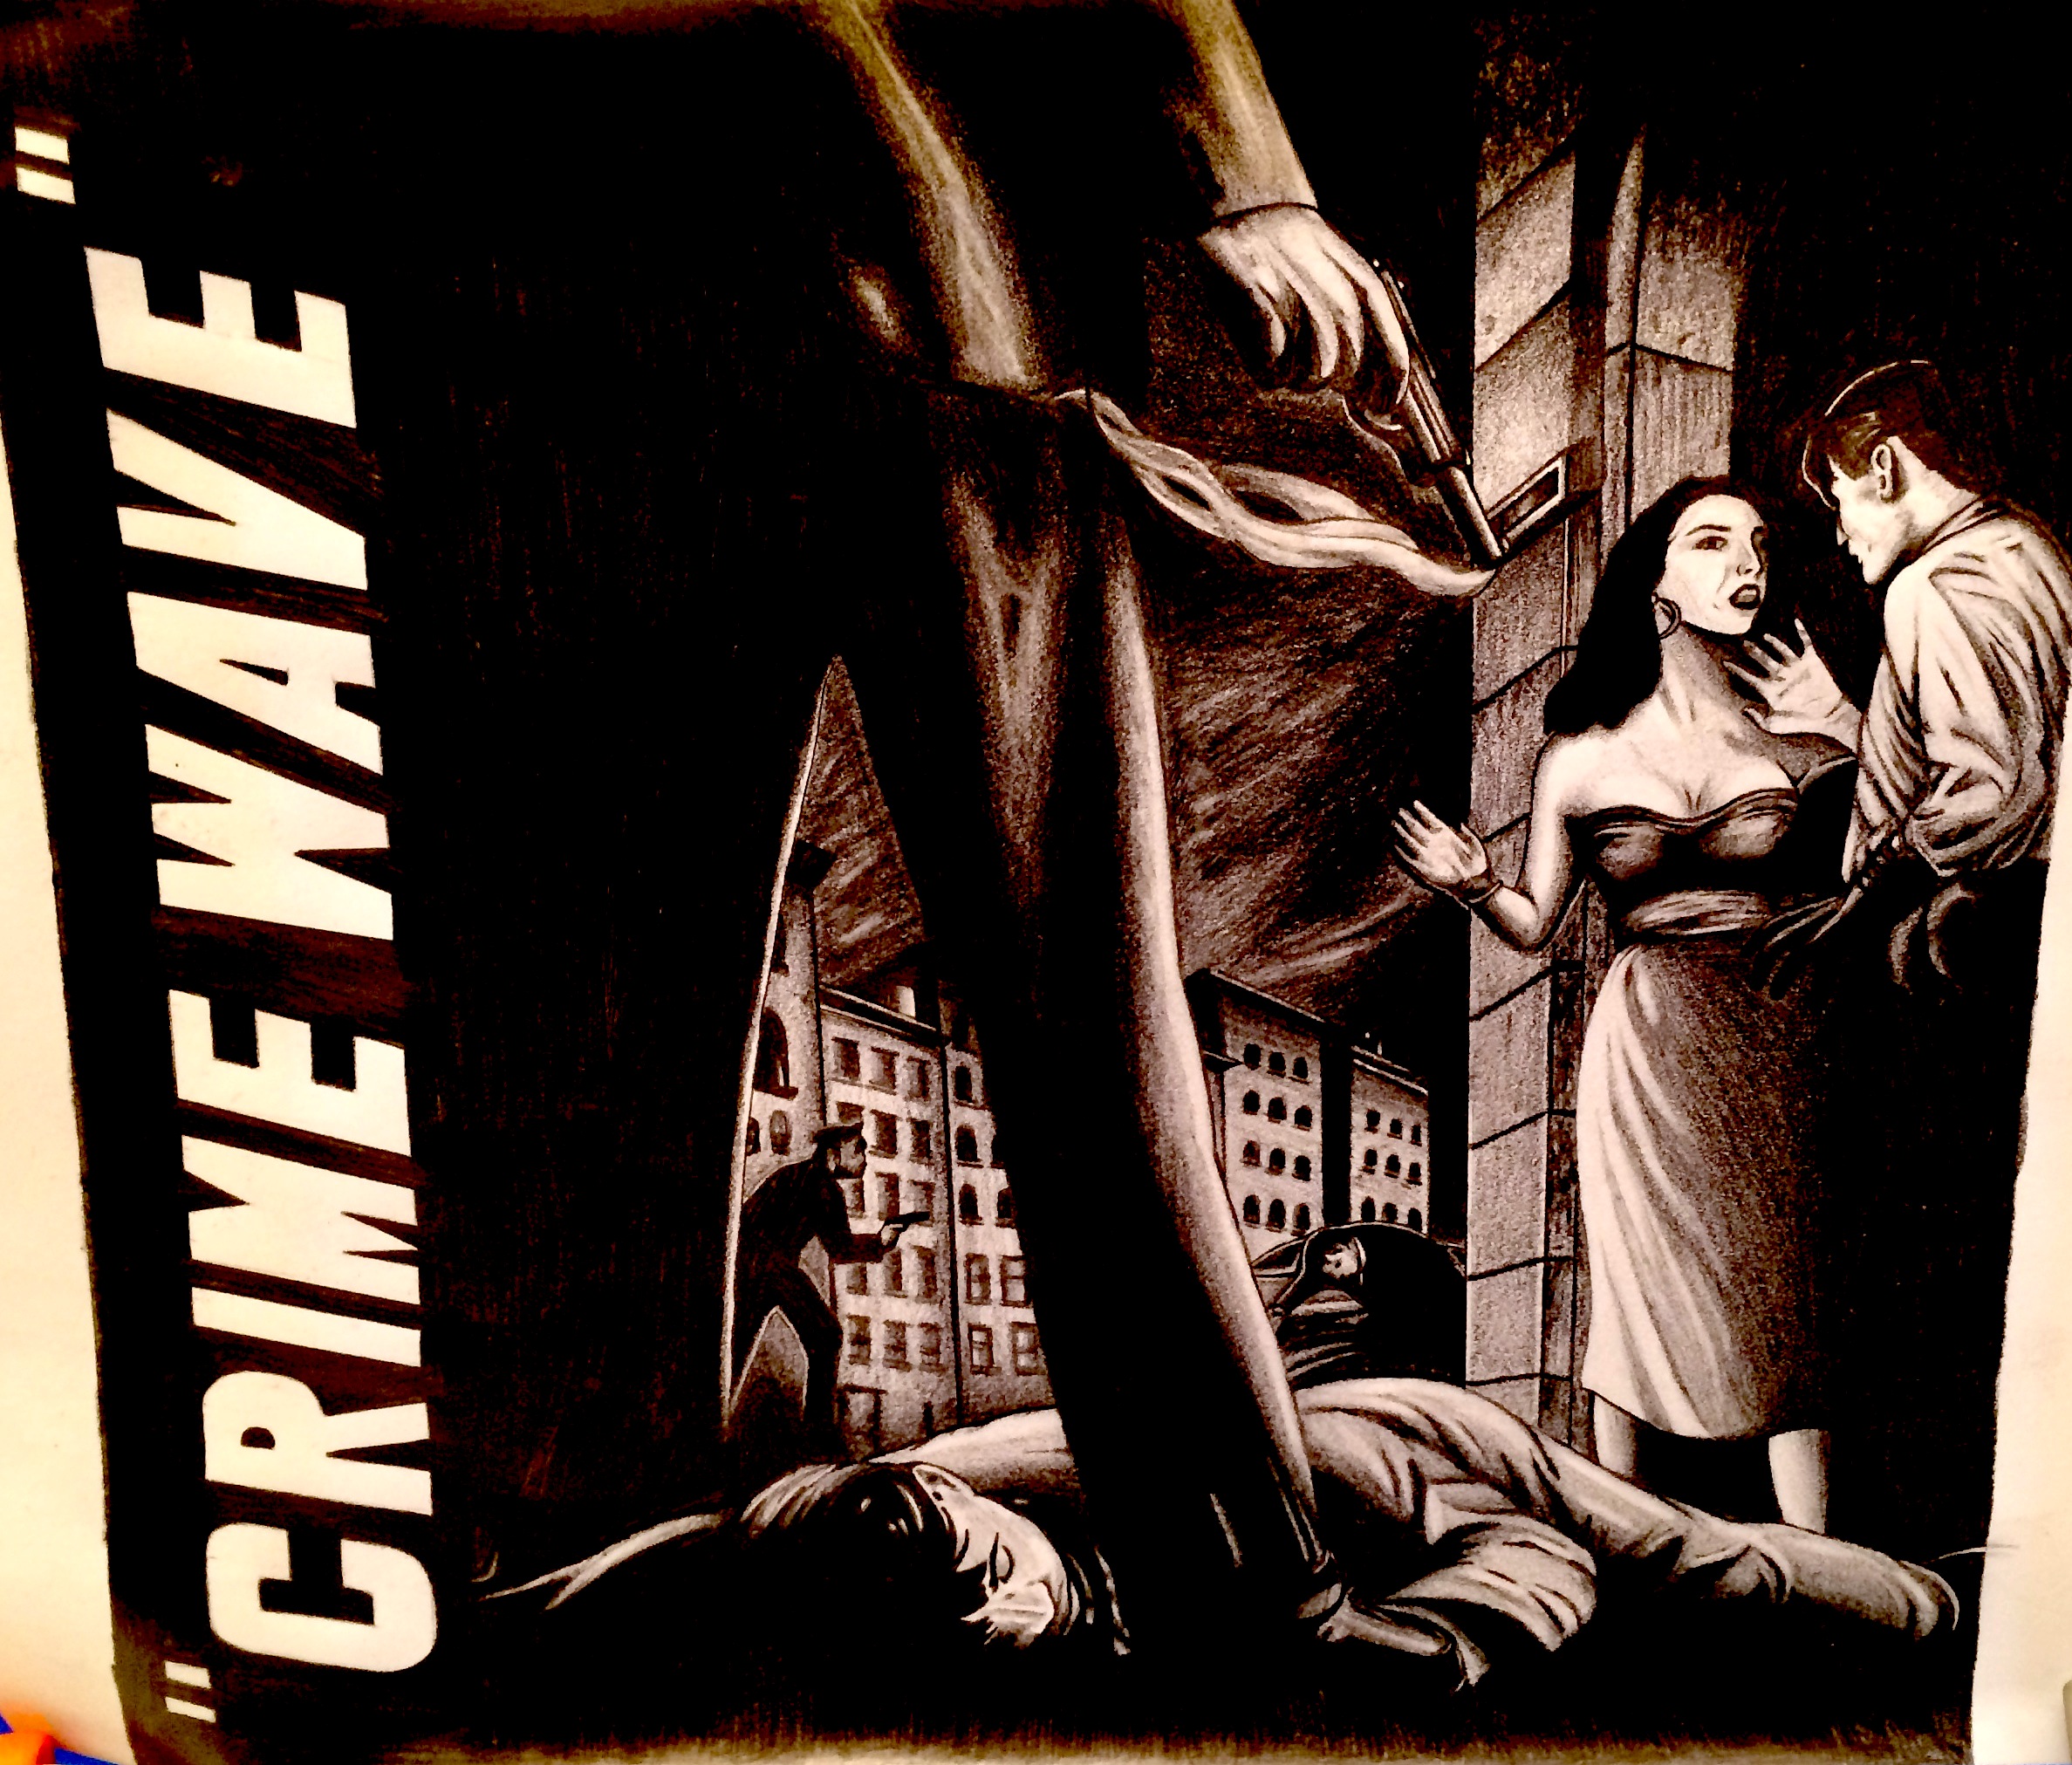 Crime wave by bettydtb